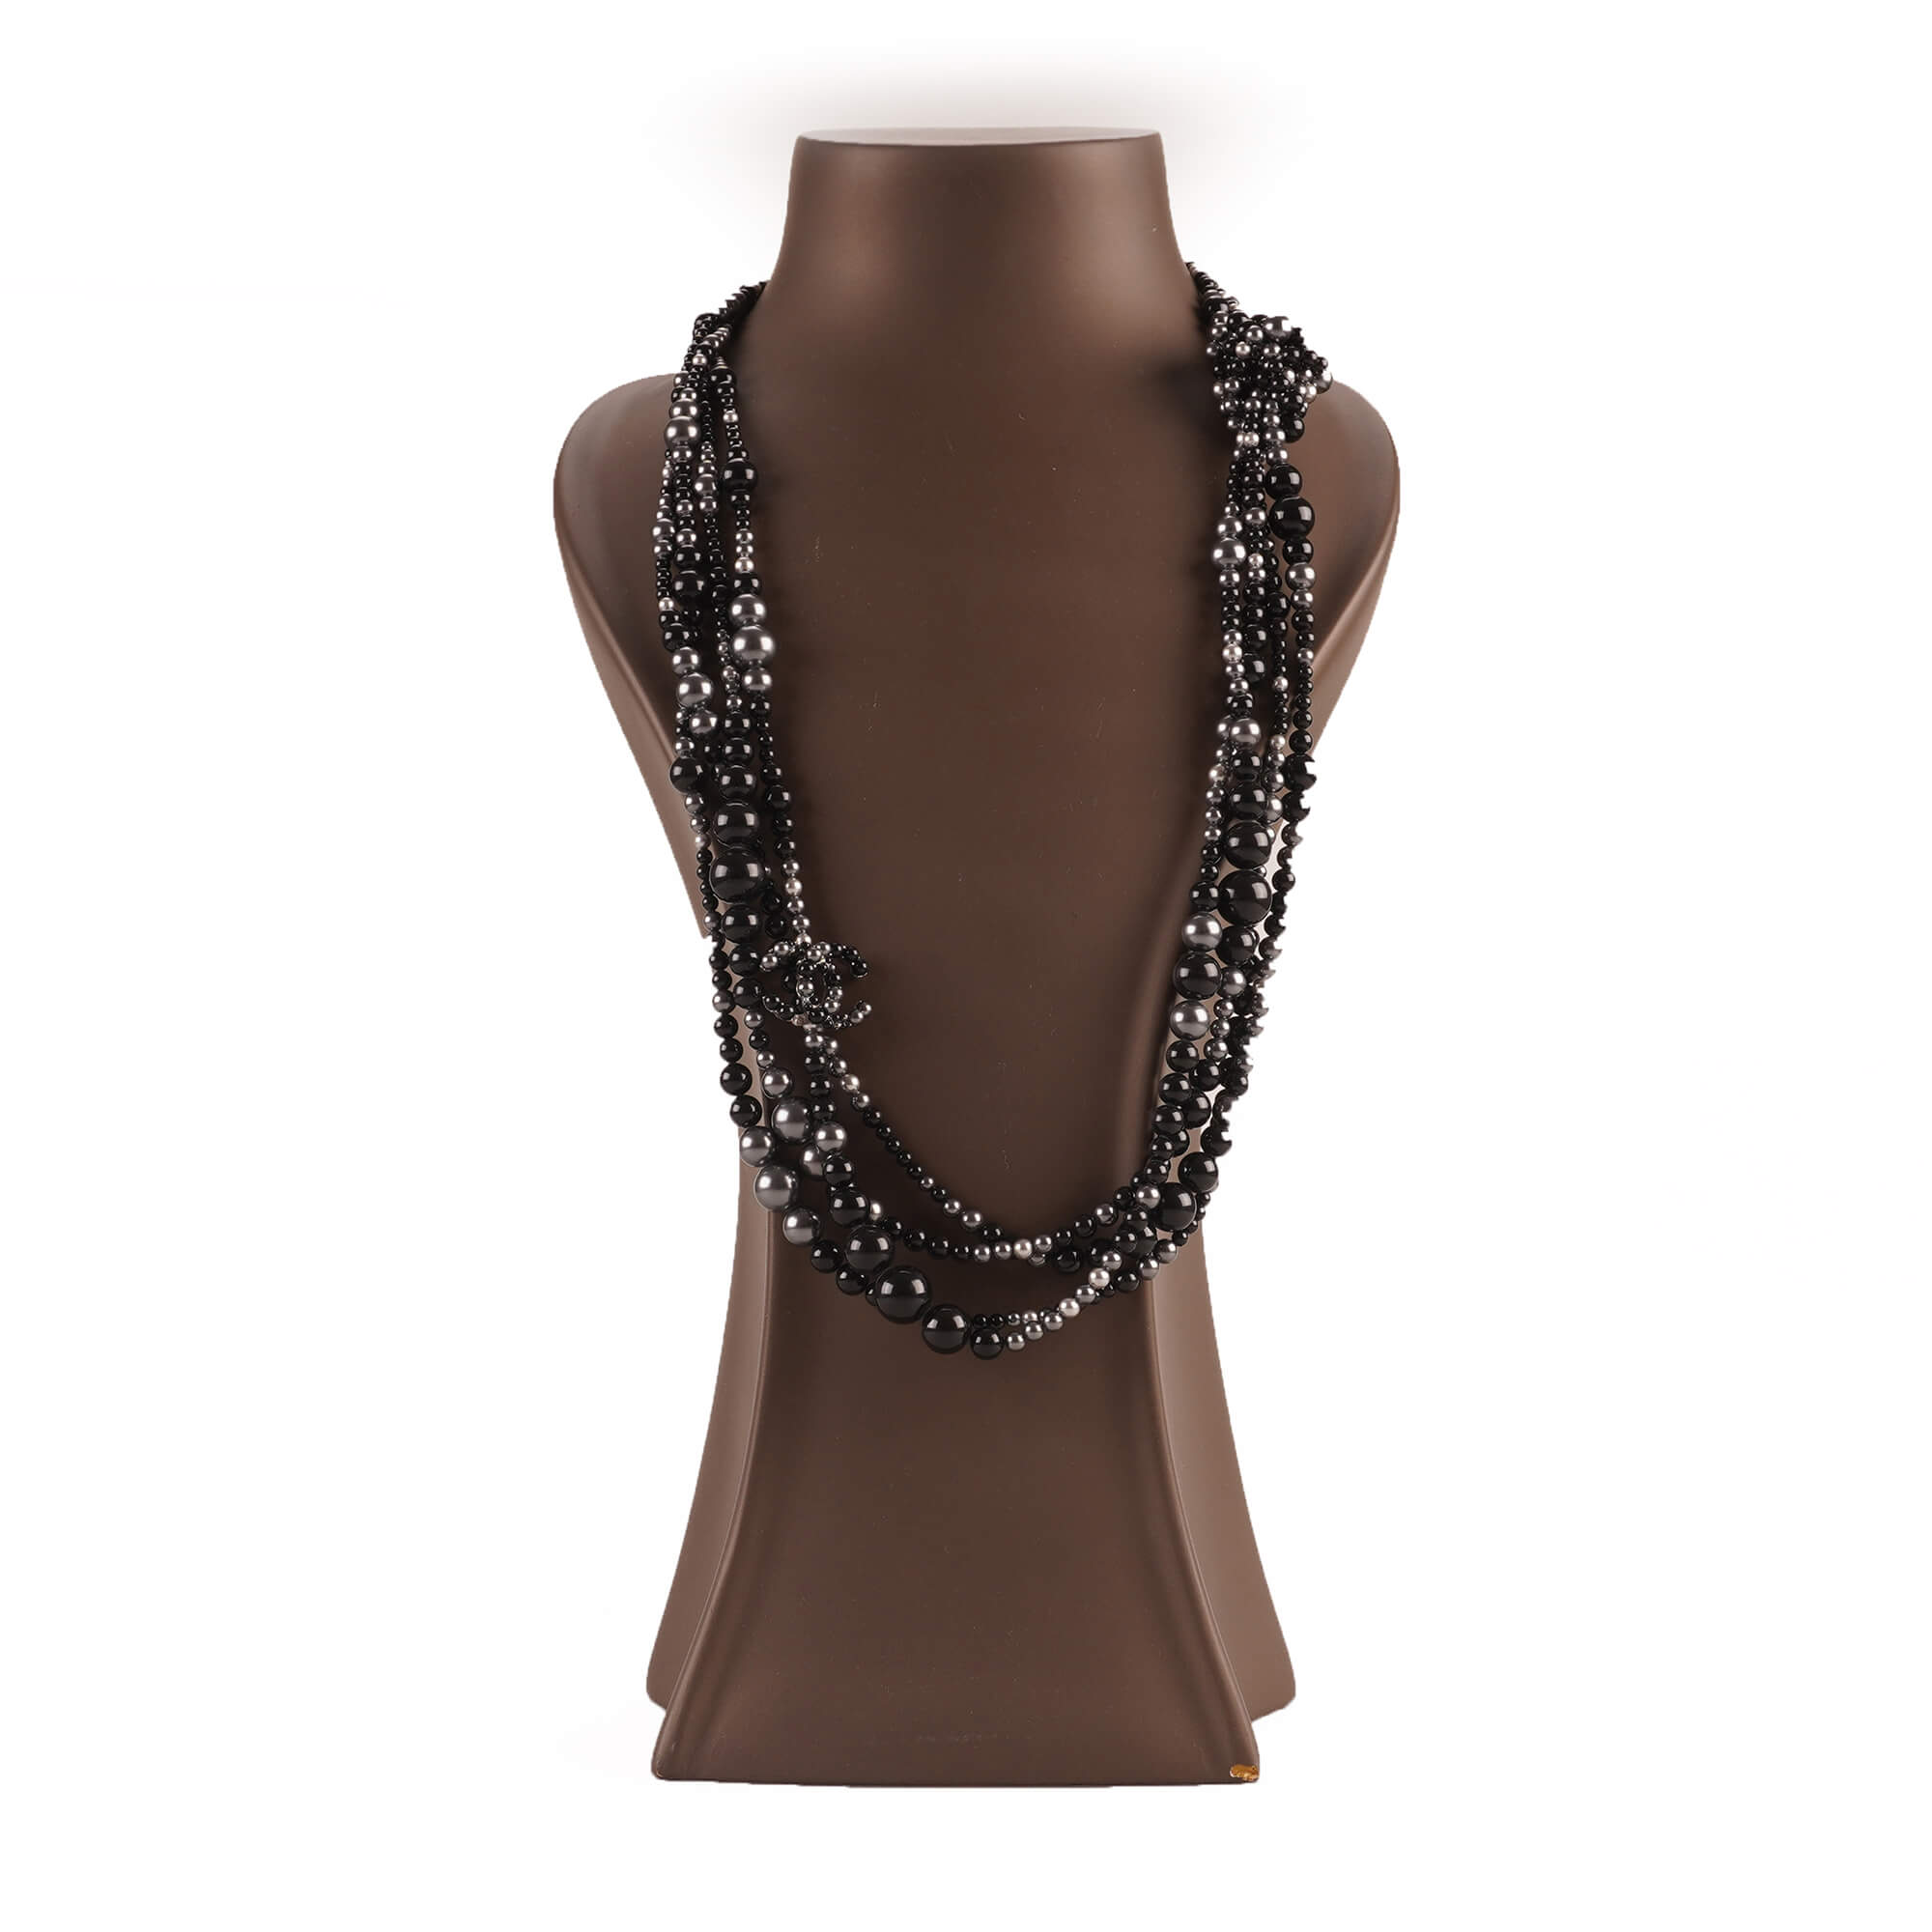 Chanel - Black and Metallic Silver Beads Long Necklace 